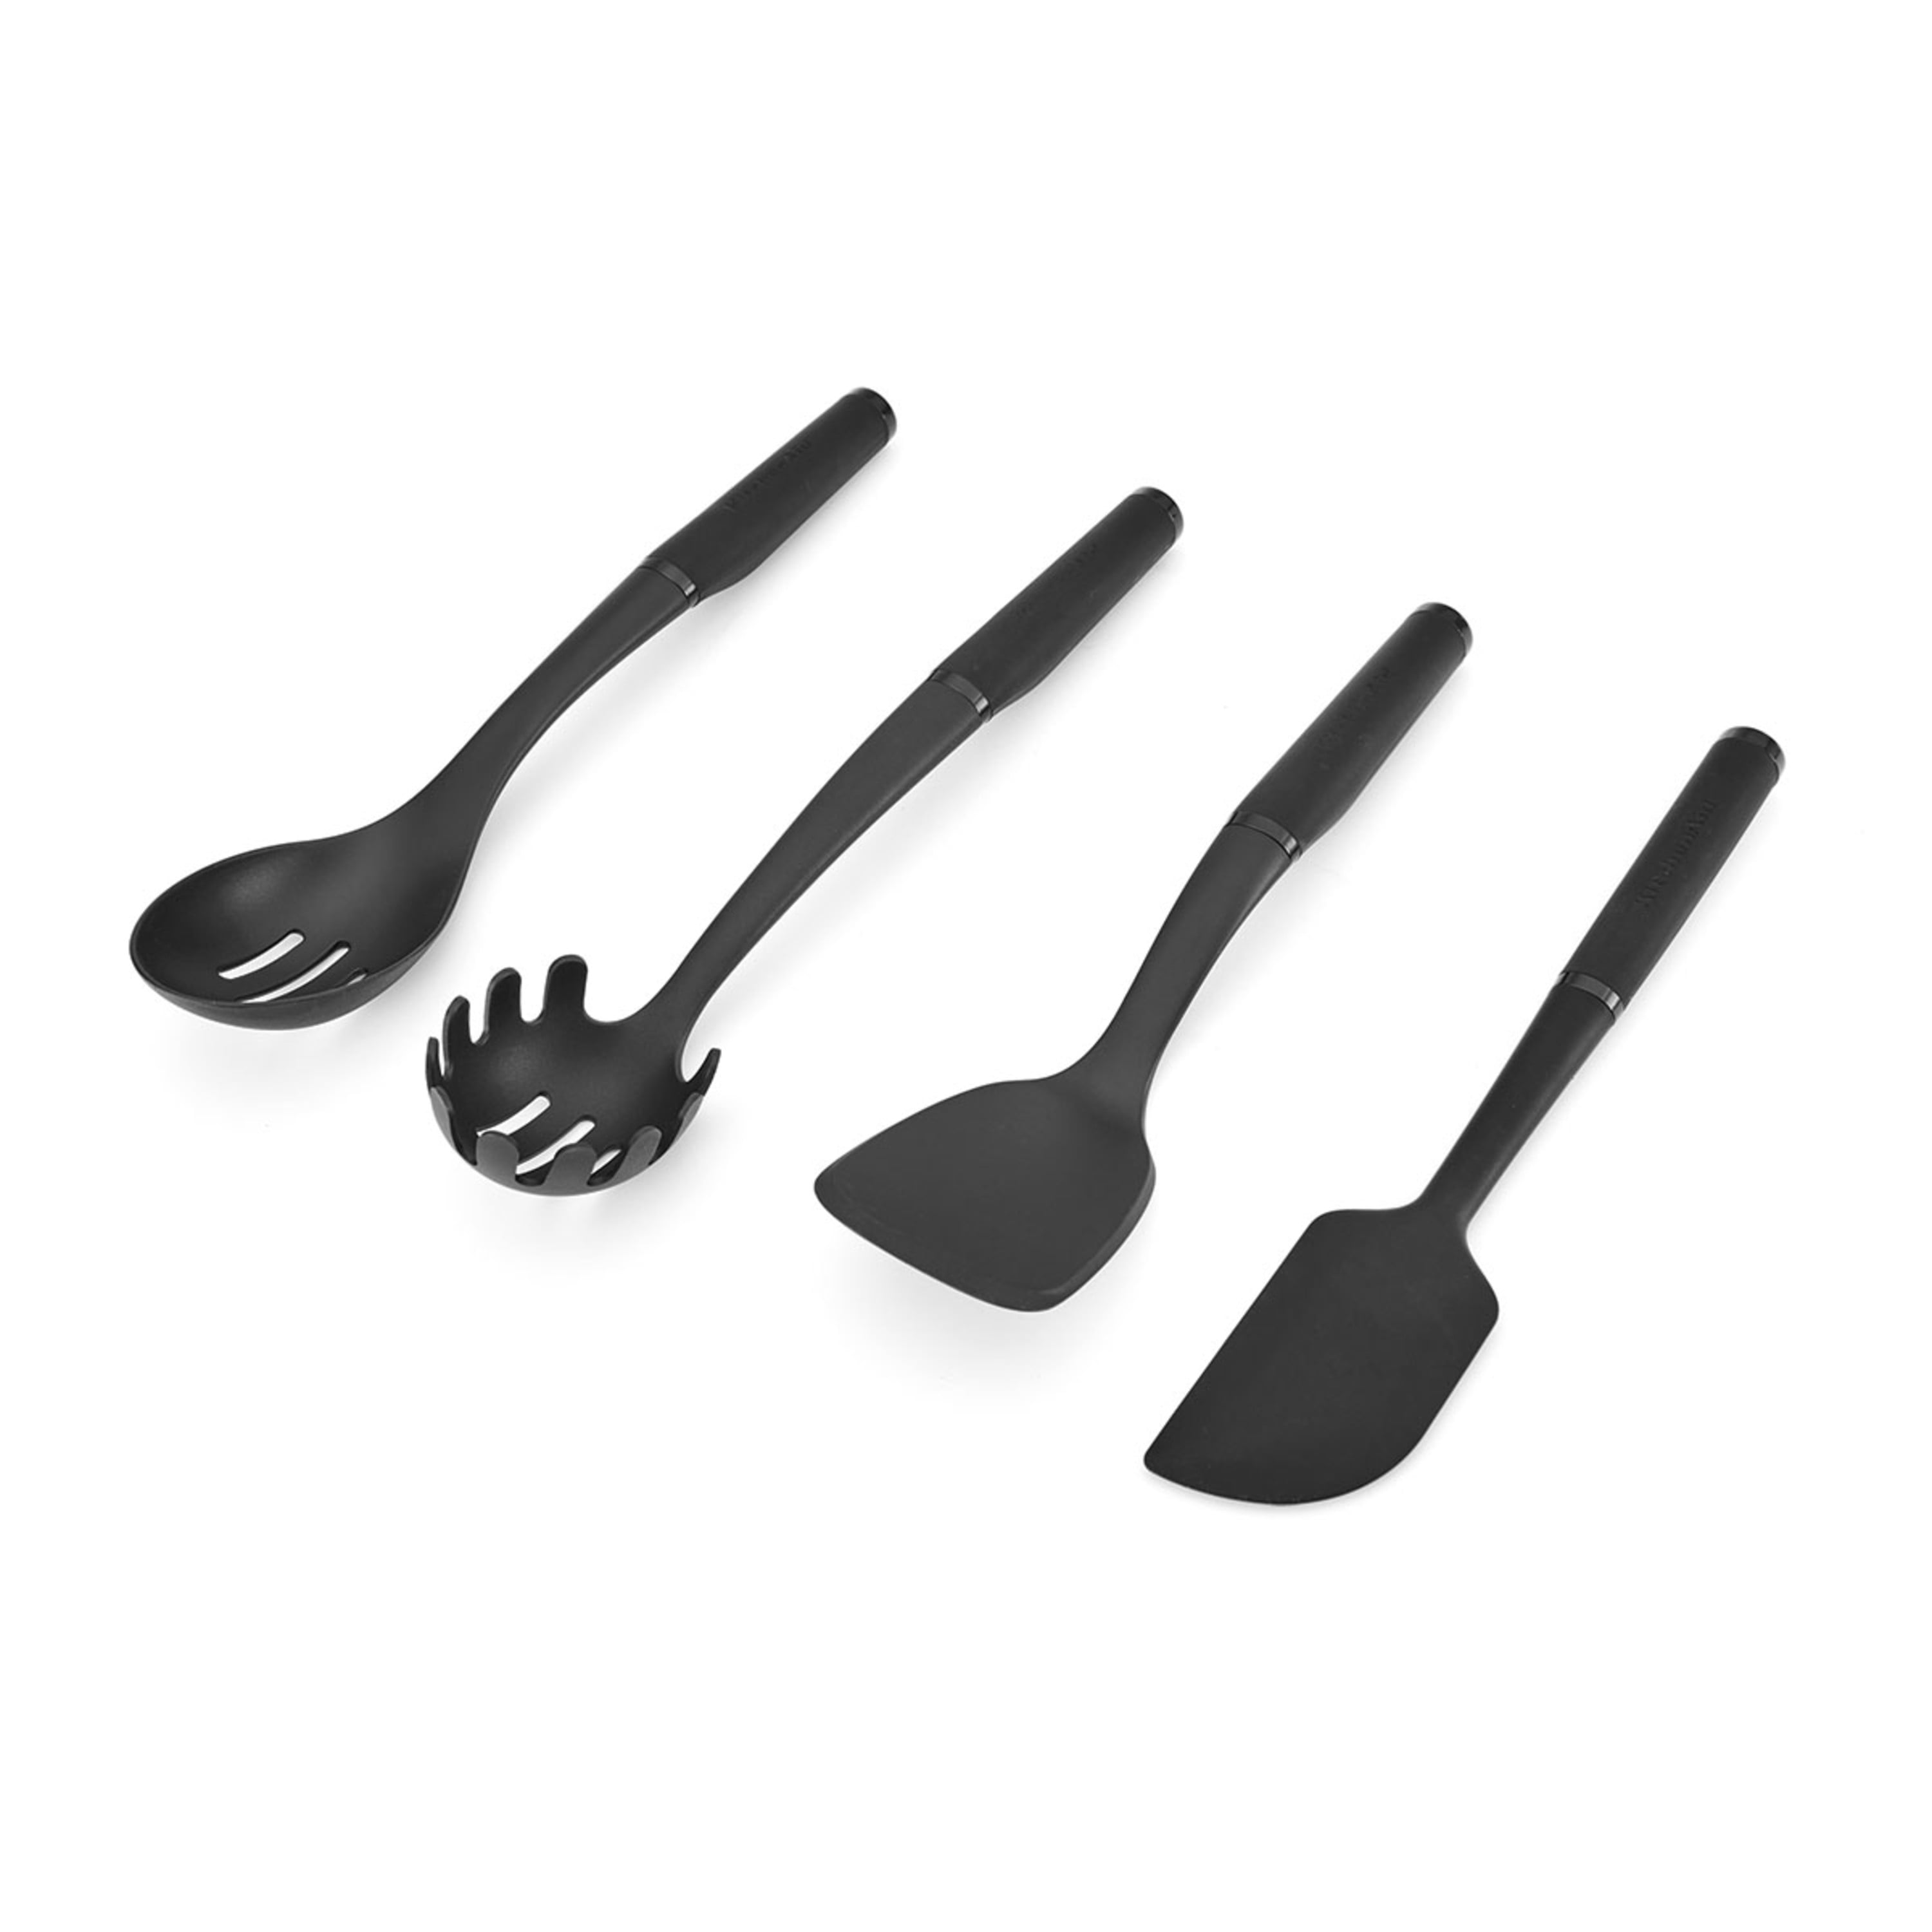 🧑🏻‍🍳This kitchenaid 4 piece silicone kitchen set is a must have